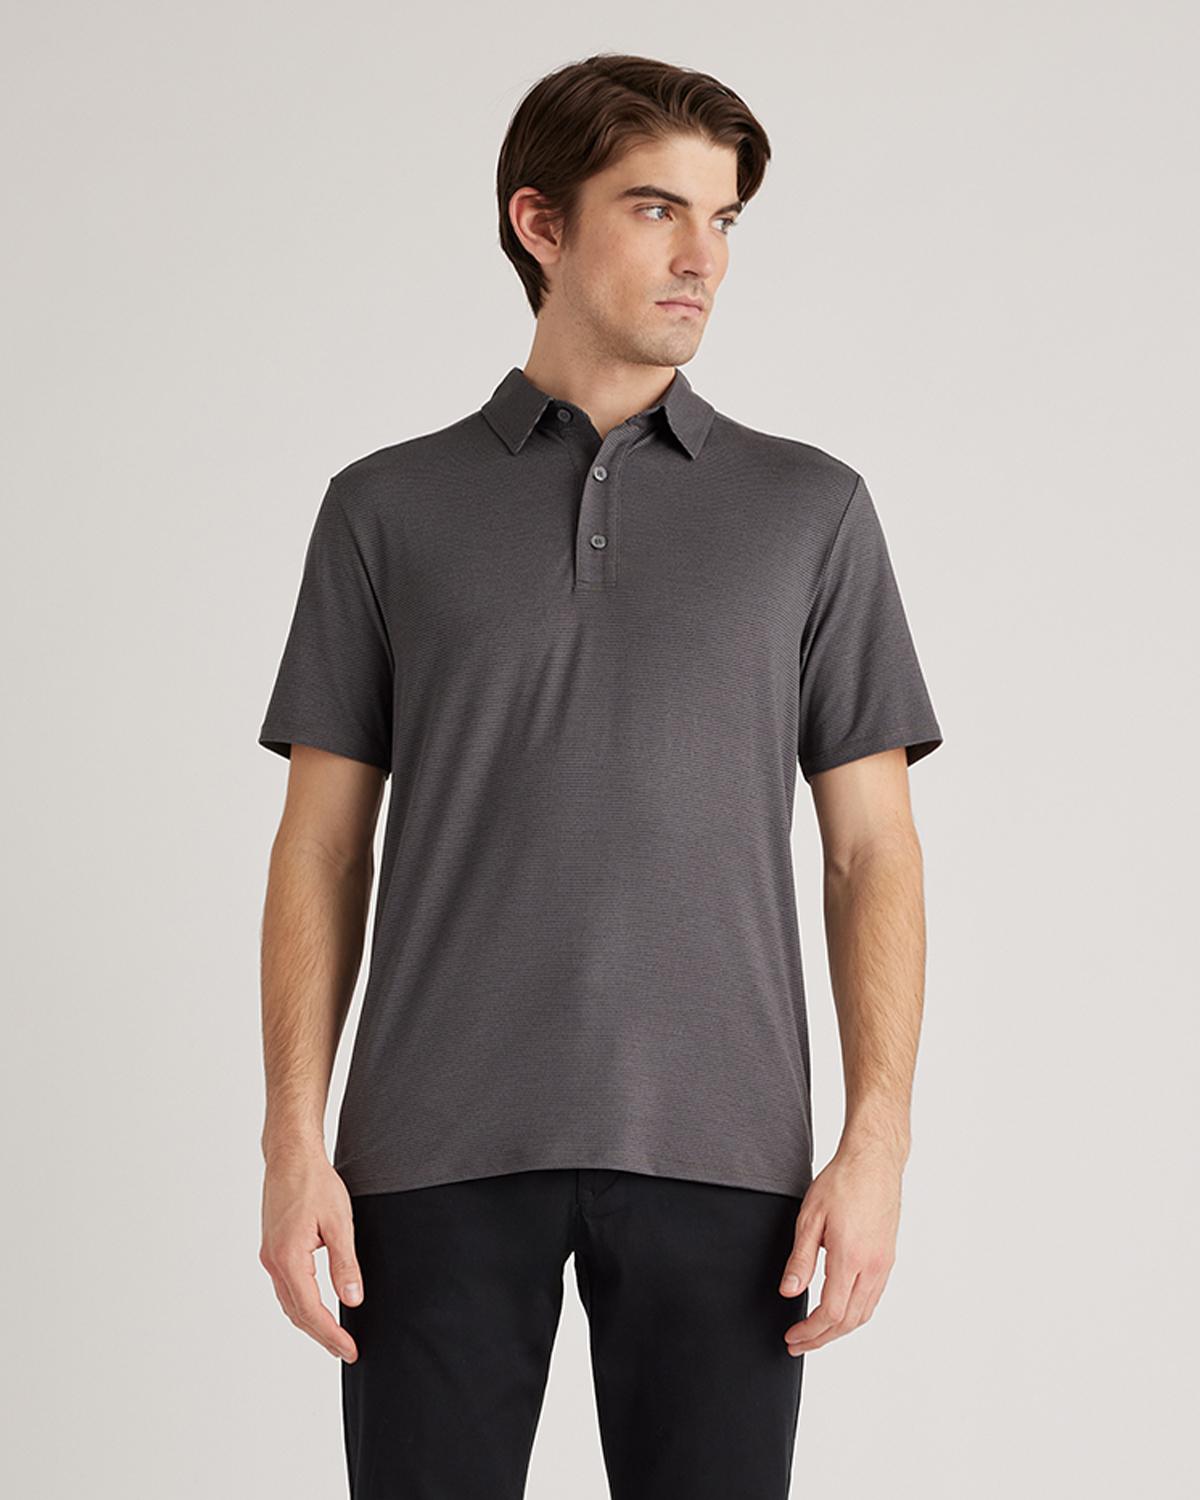 Quince Men's Performance Jersey Golf Polo In Black/light Grey Stripe